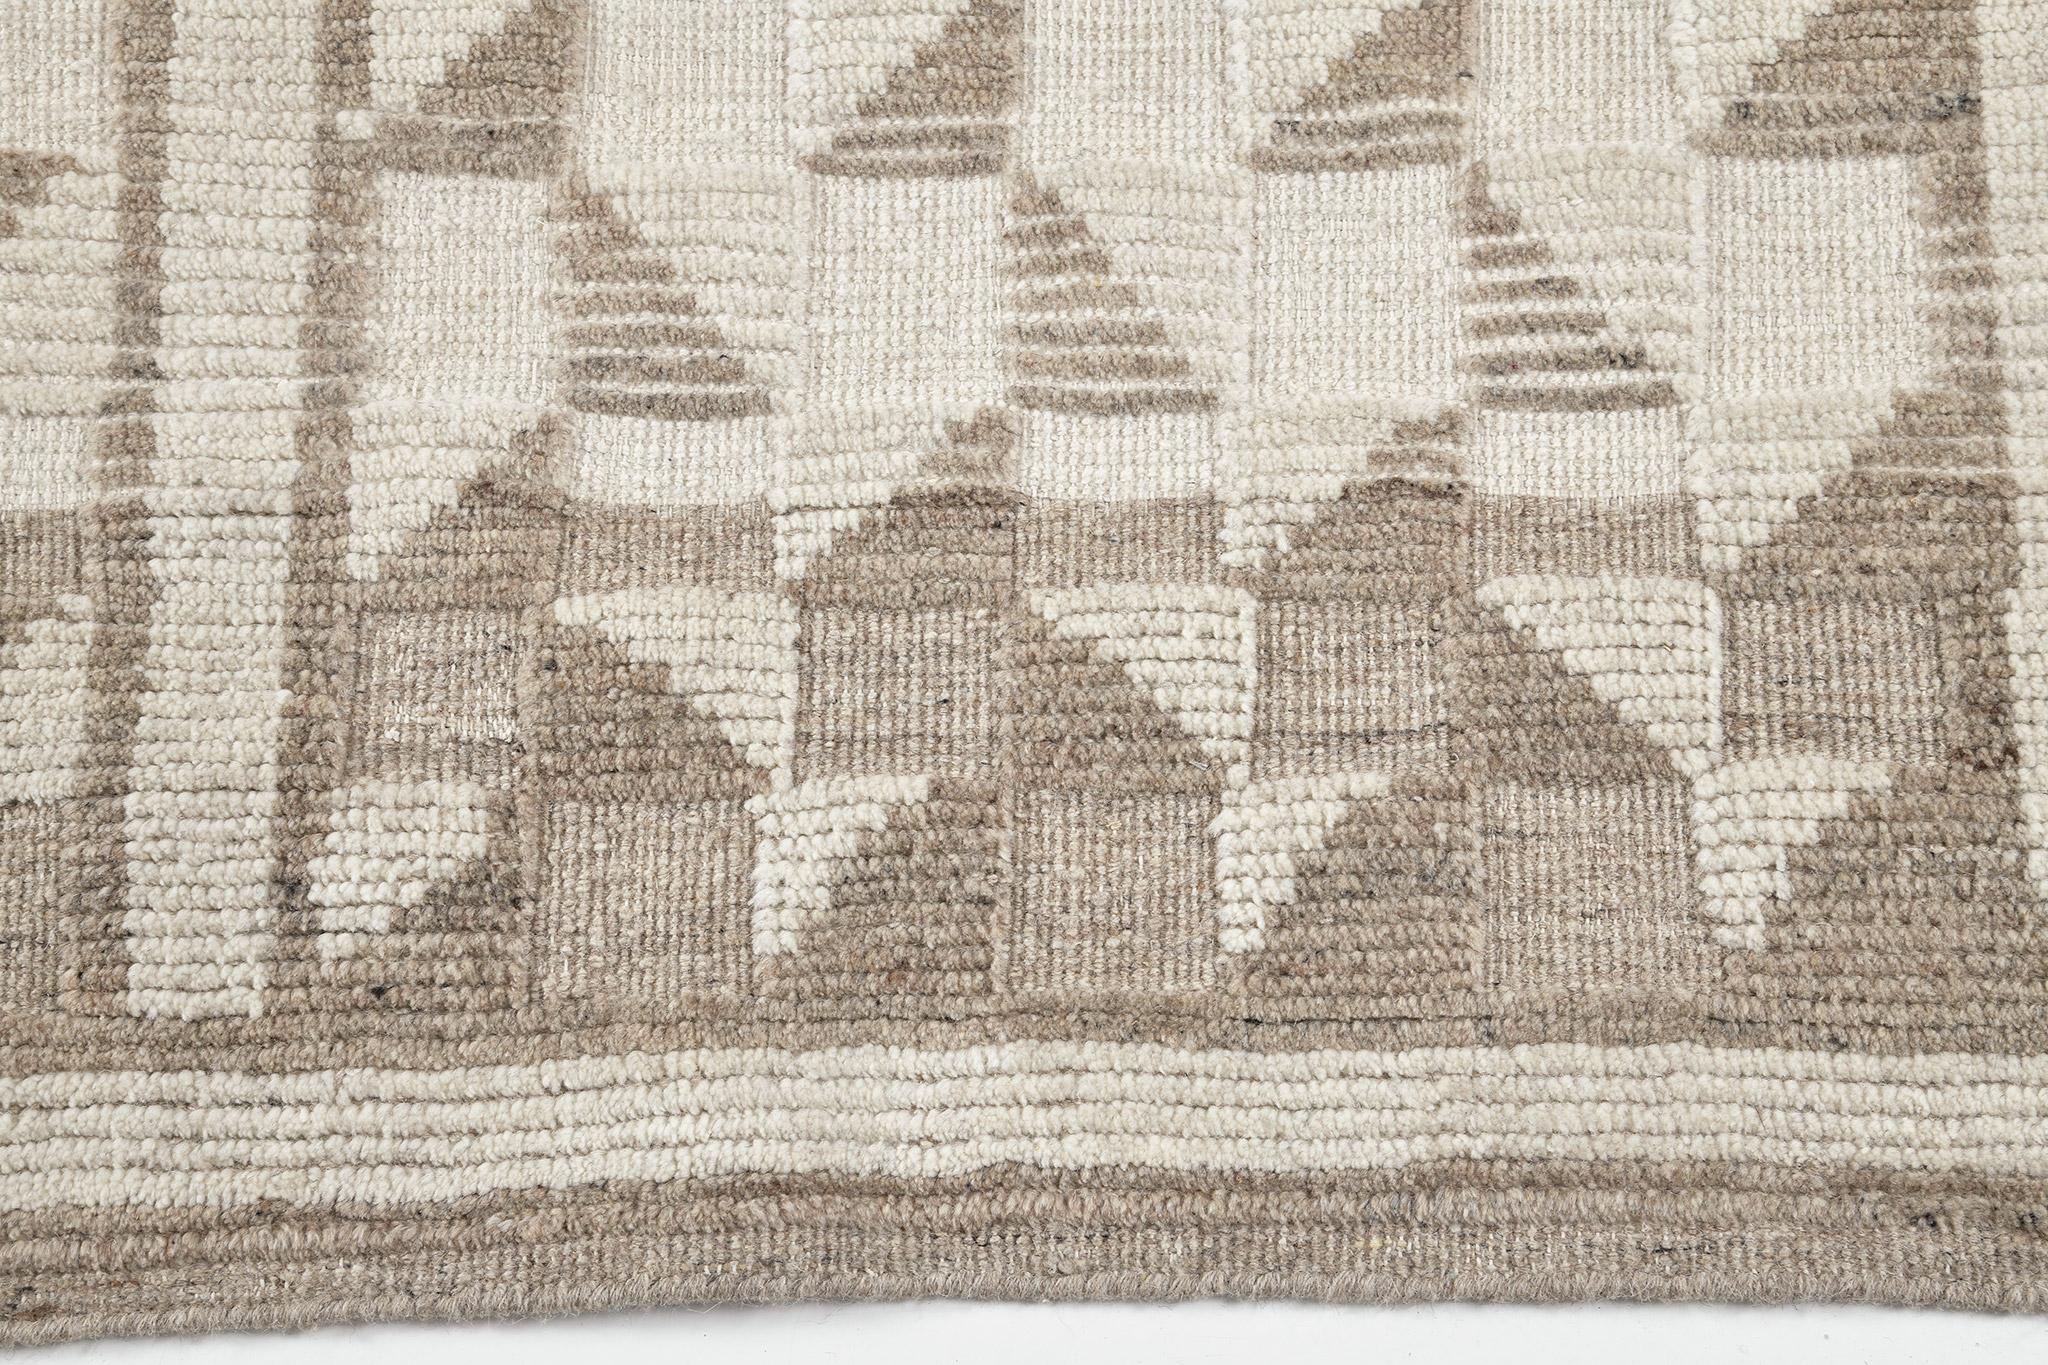 Revealing the panel design geometric motifs, Franc’ in Estancia Collection boasts its character and style. This captivating rug features stunning earthy toned shades in beige and taupe. This rug creates an impressive pattern perfect to be placed on